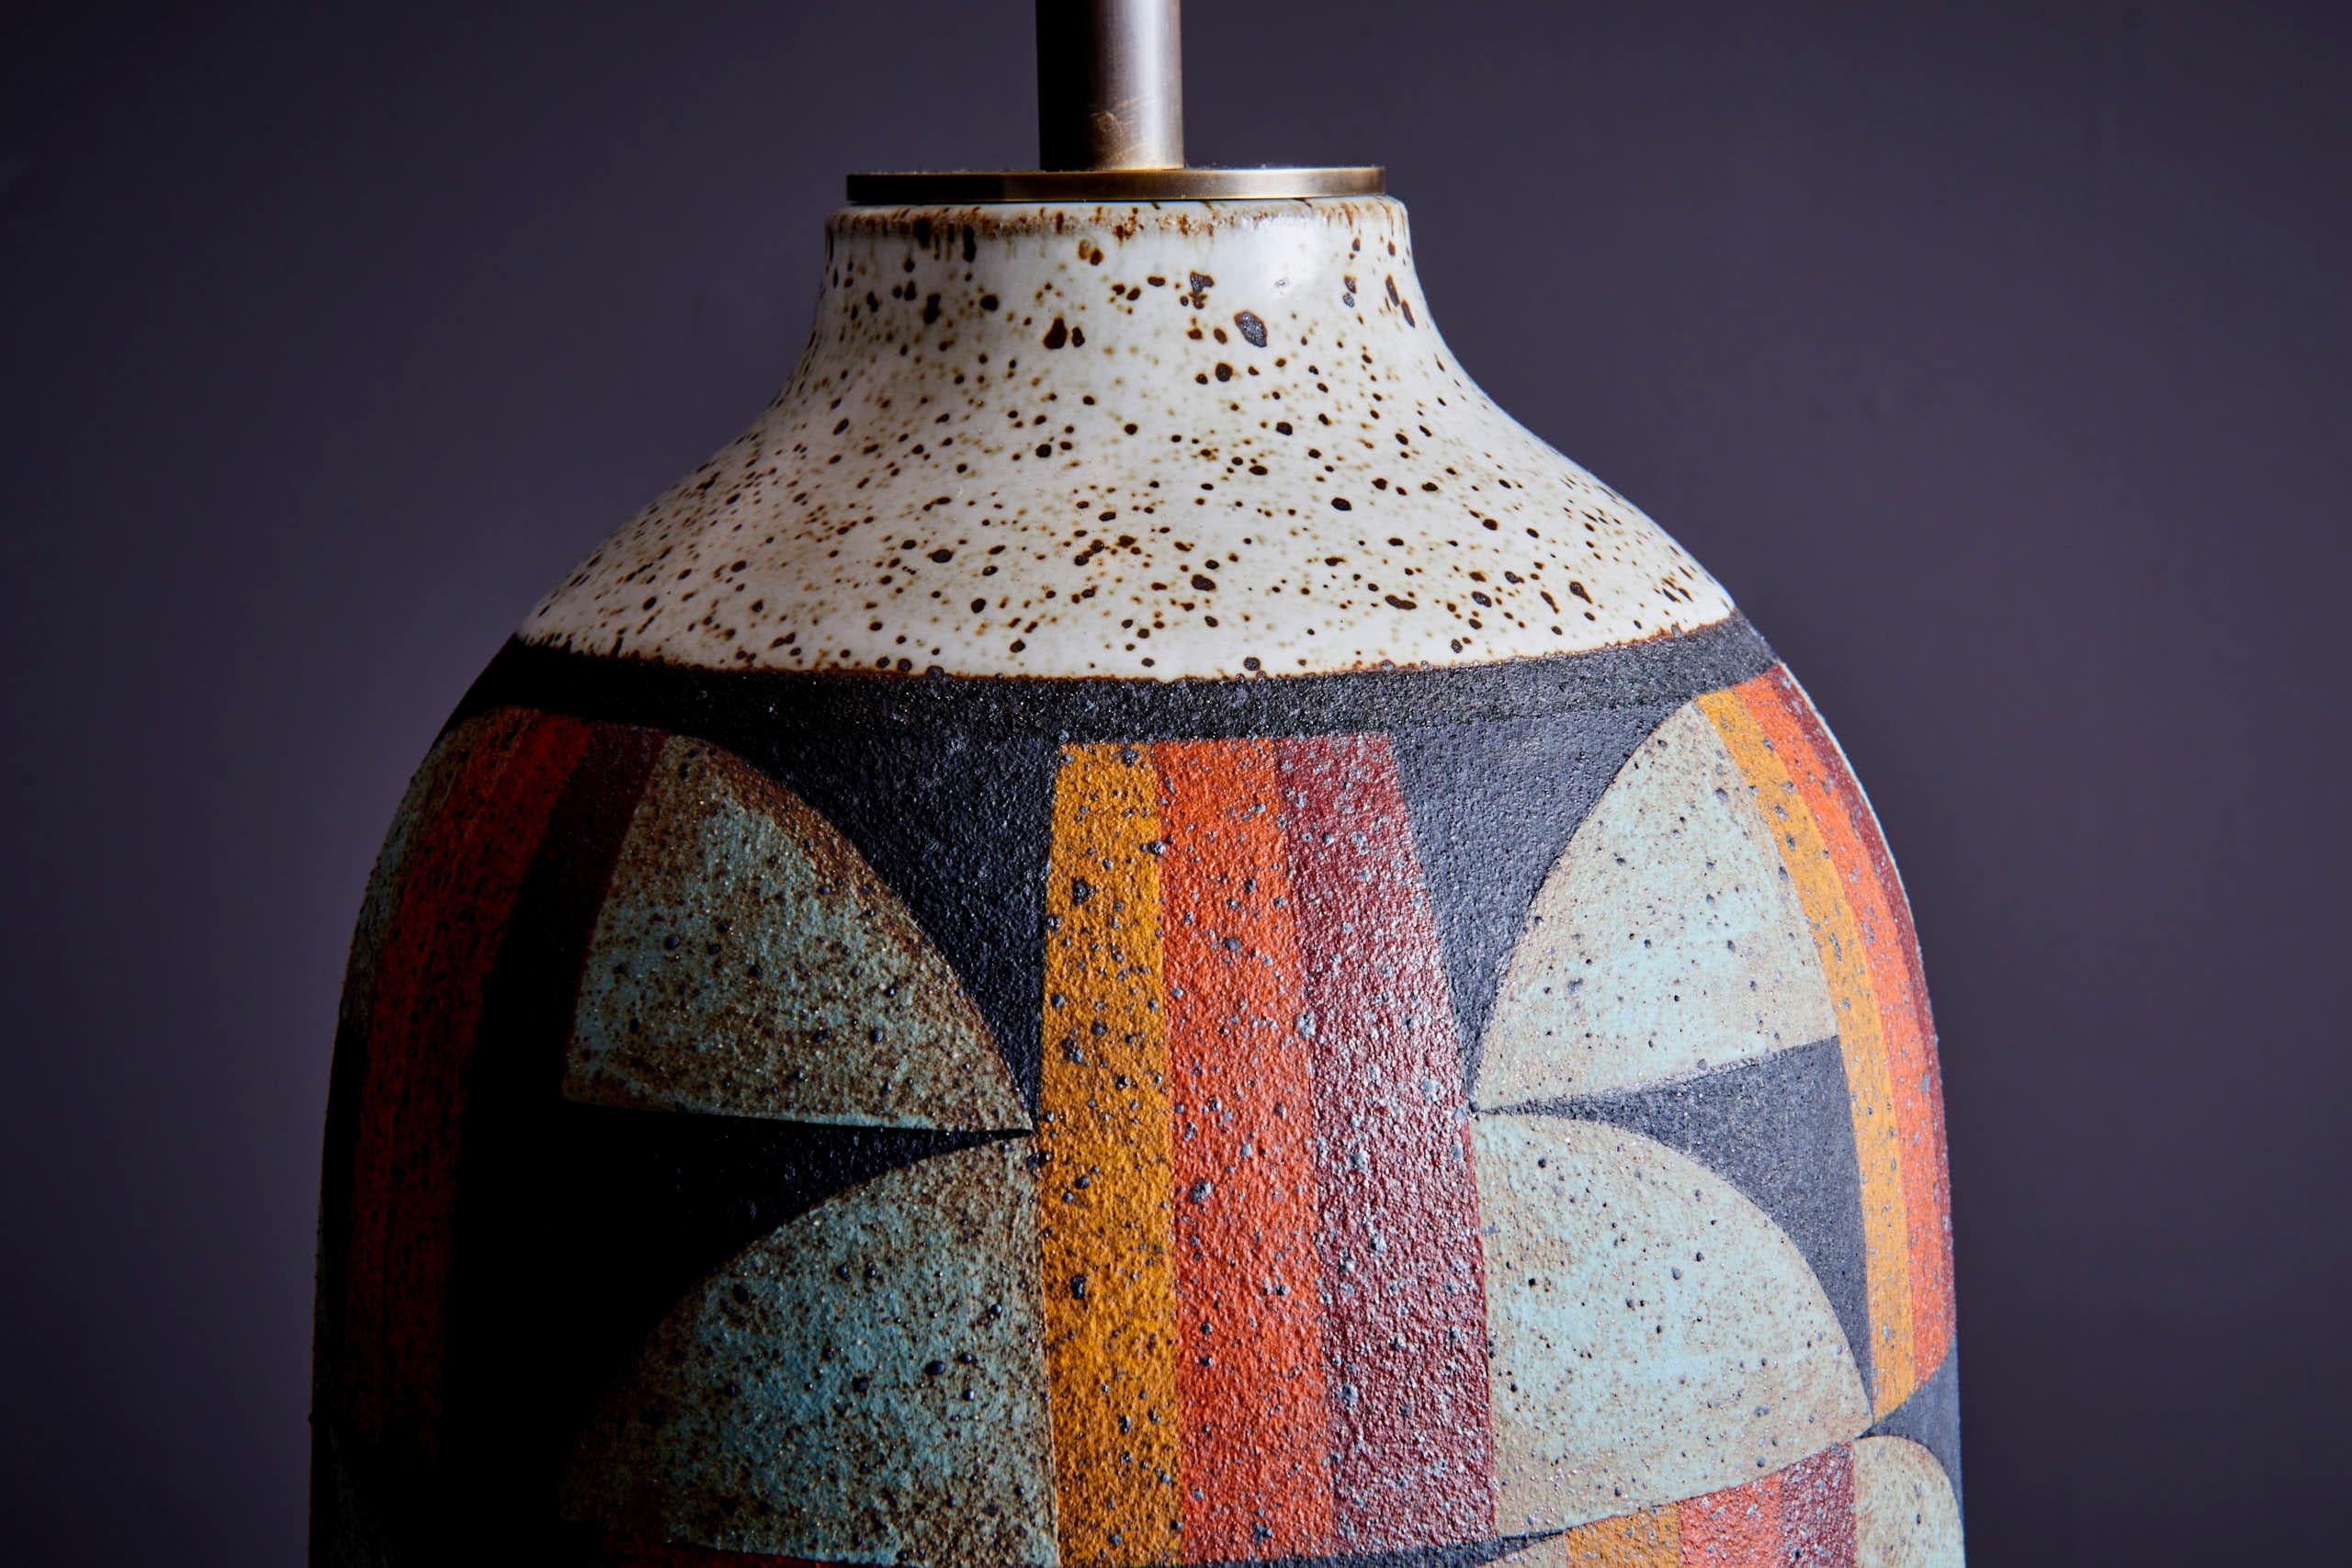 Ceramic Kat & Roger Table Lamp with hand-crafted and hand-painted ceramic base, USA